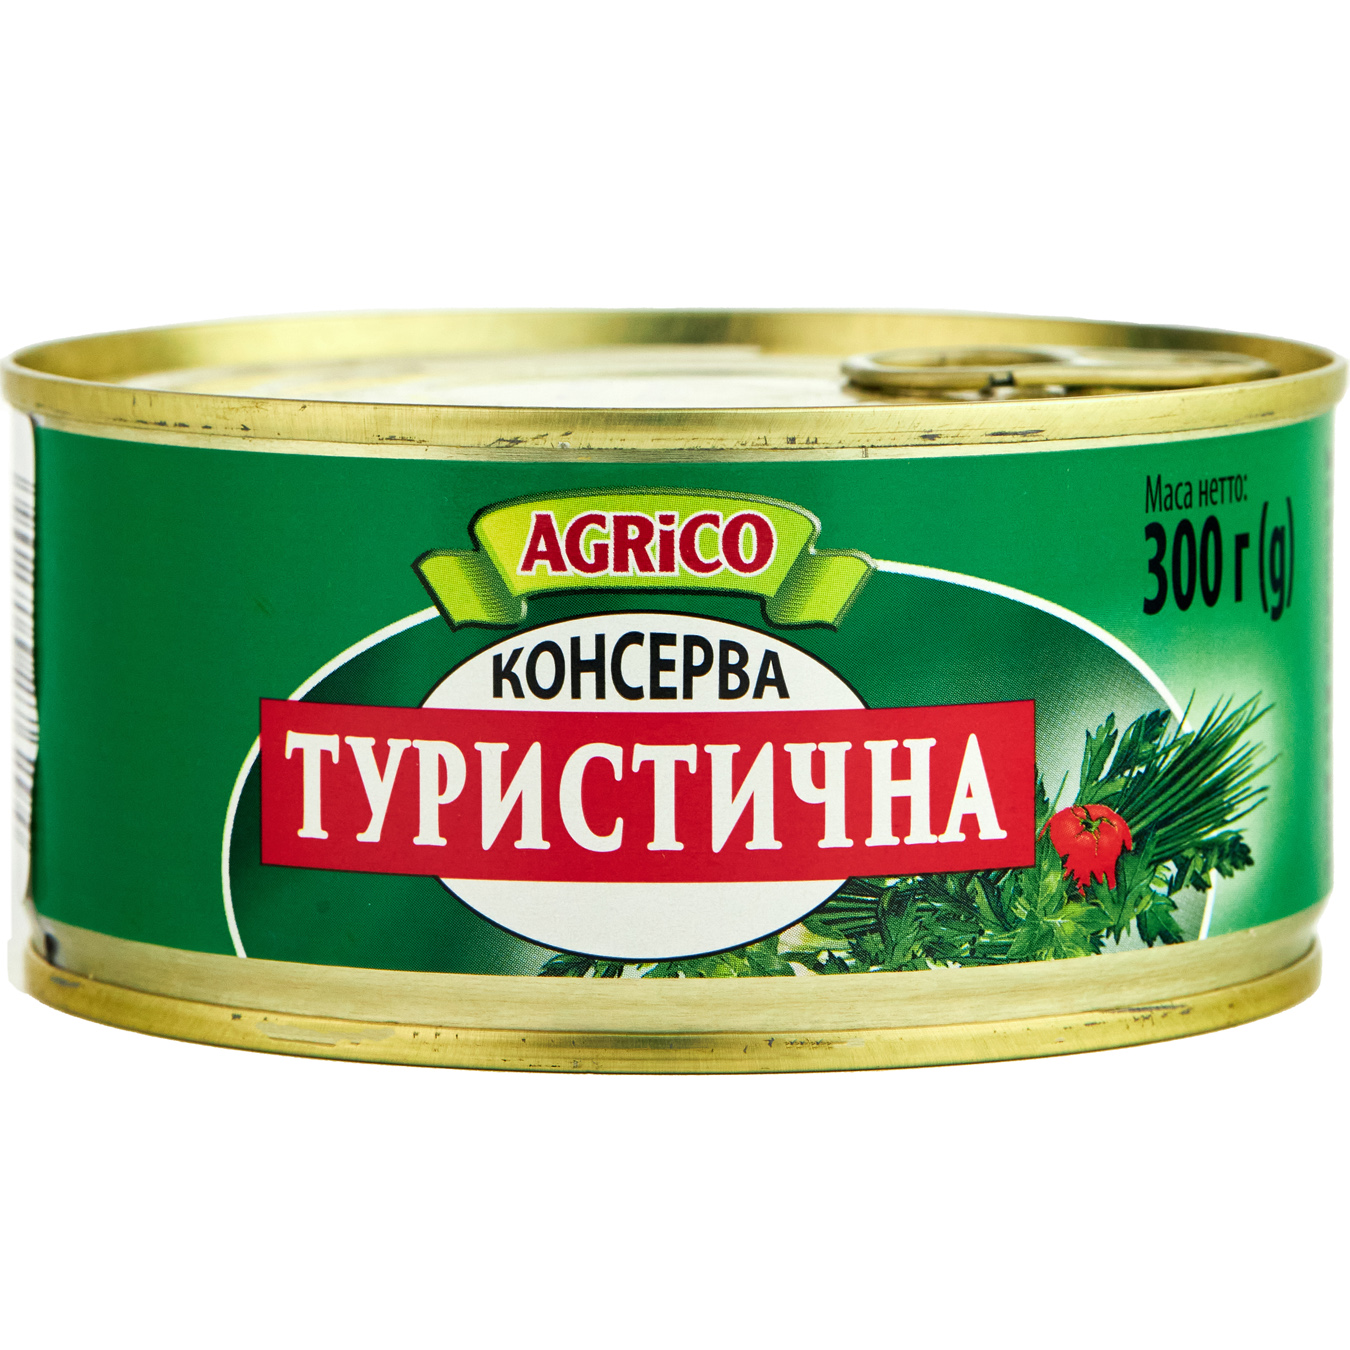 Agrico meat canned 300g